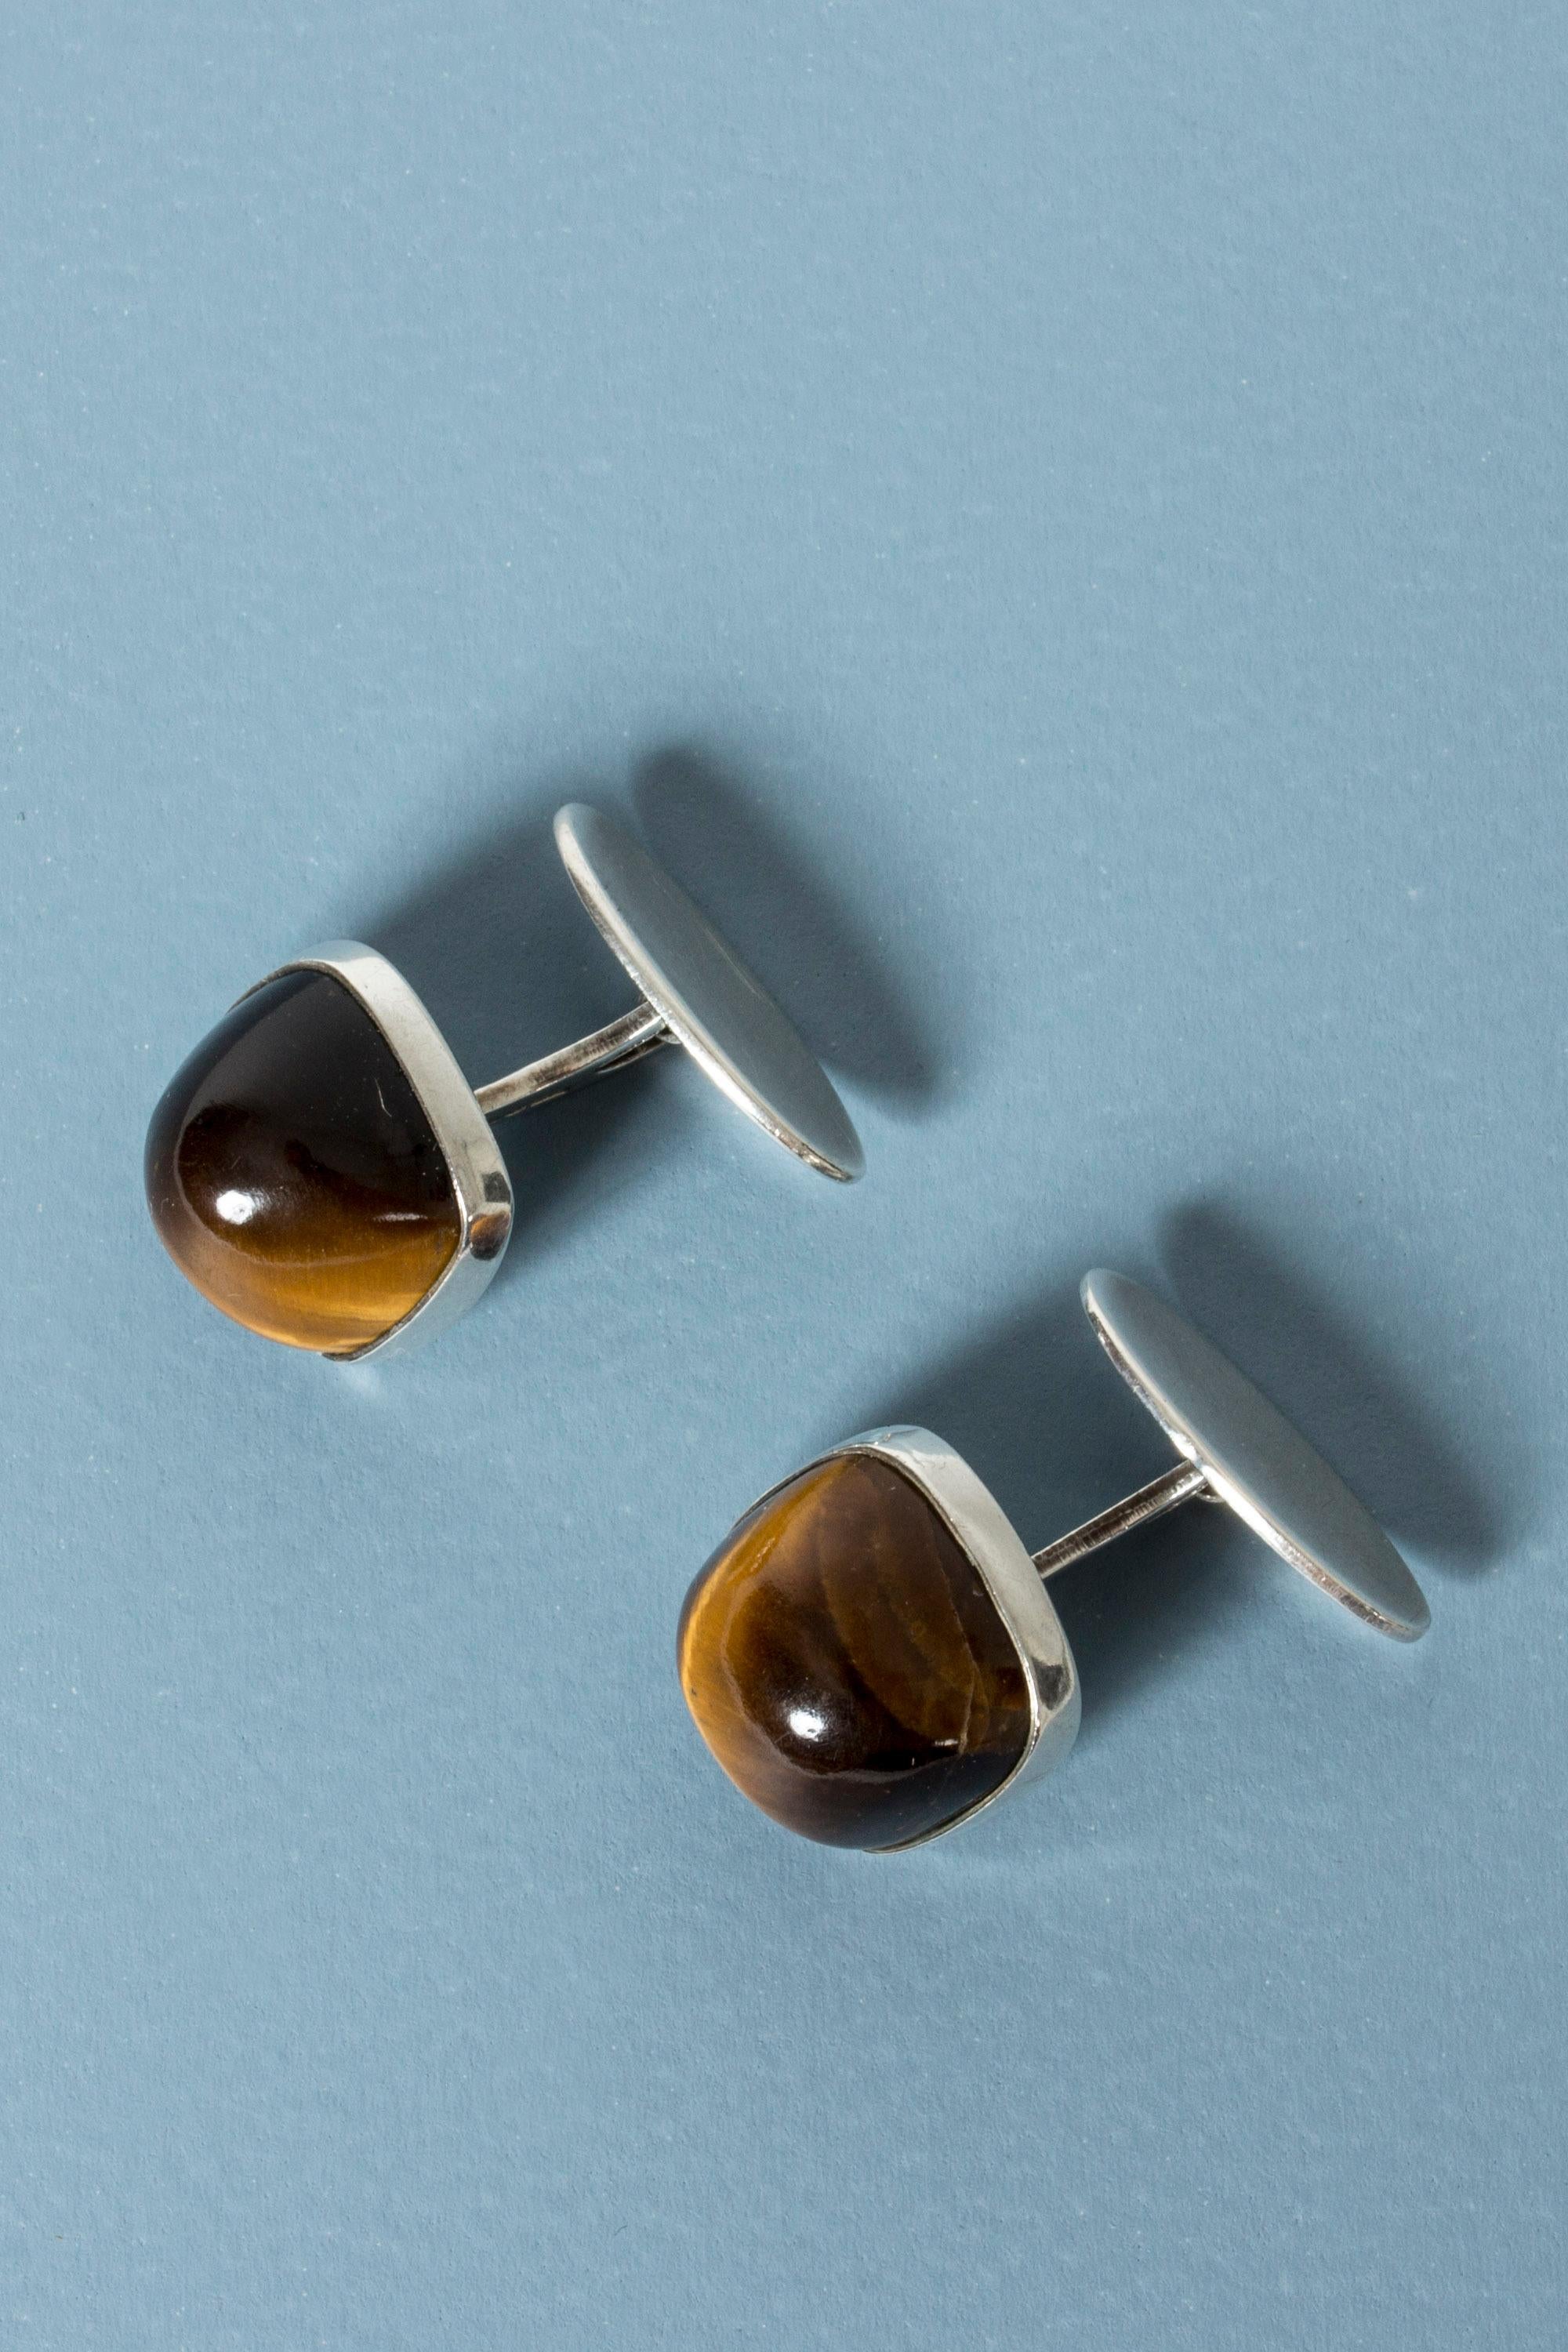 Modernist Pair of Silver and Tigereye Cufflinks from Kaplans, Sweden